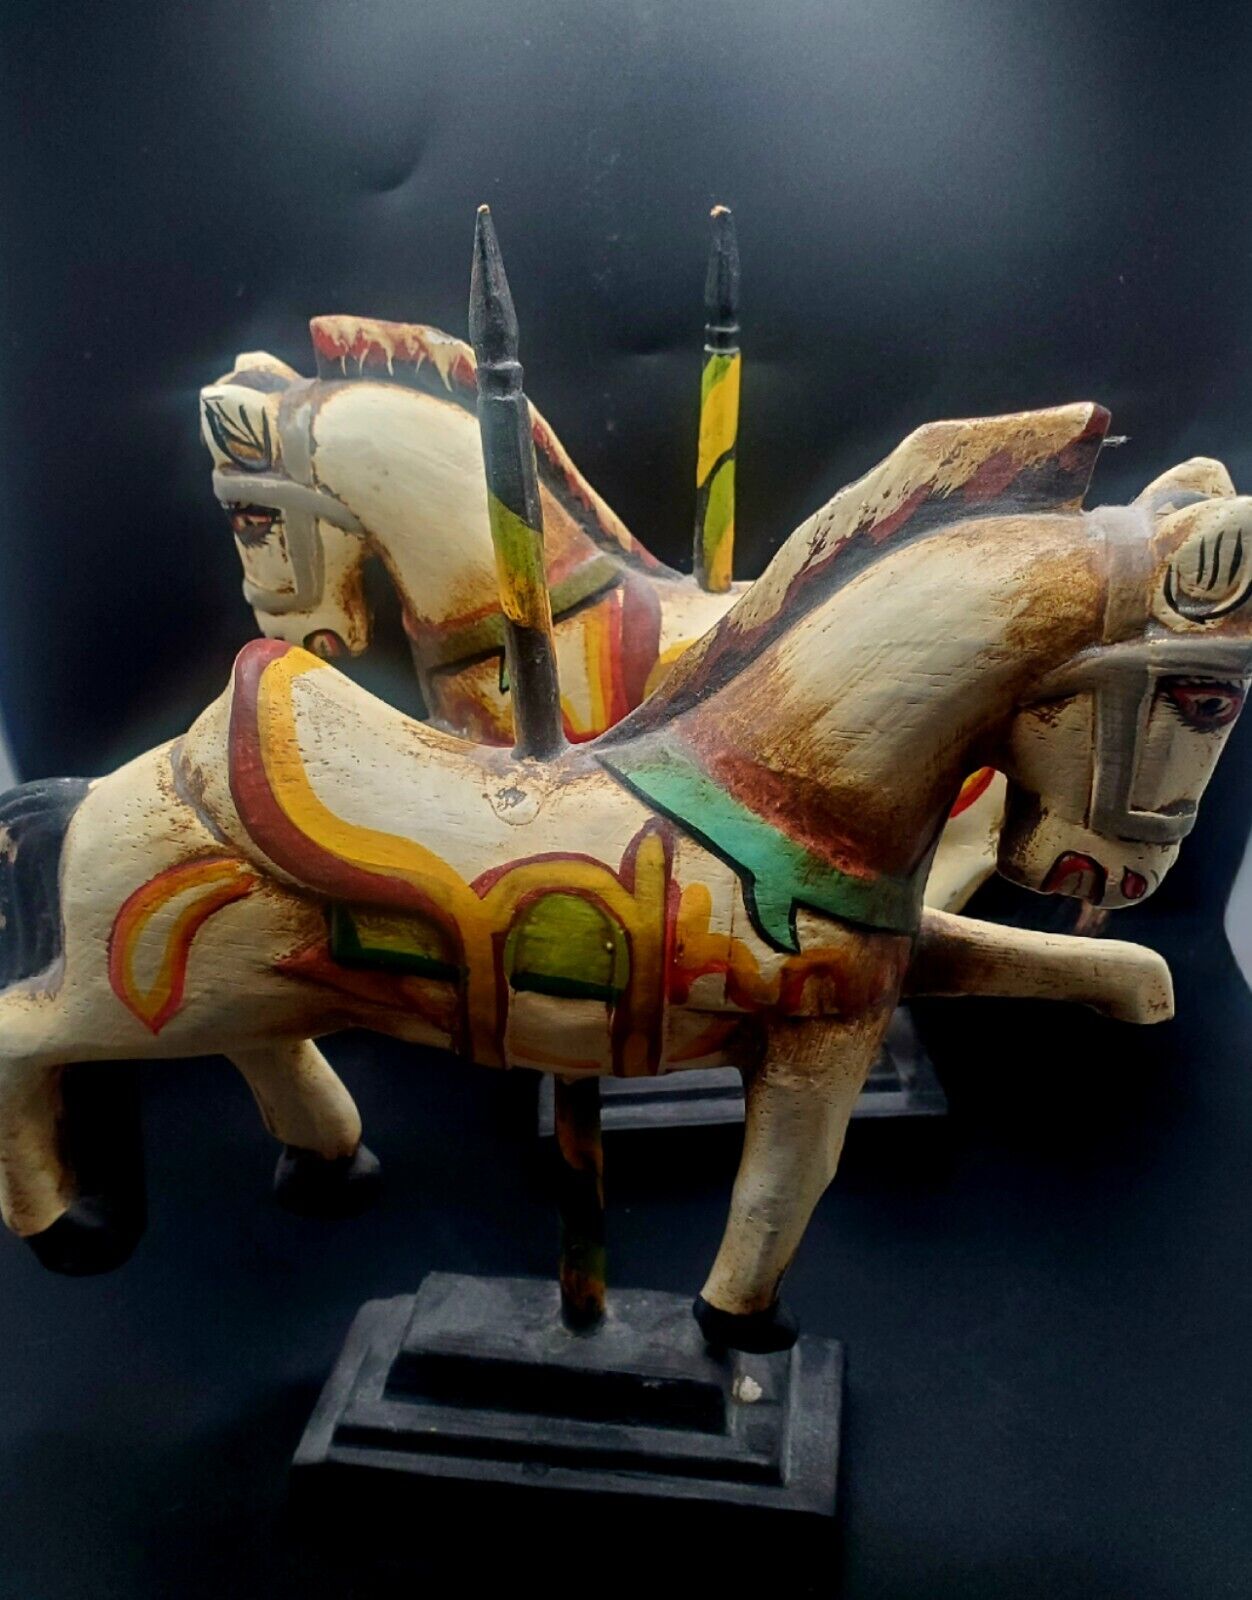 PAIR OF CAROUSEL HORSES HAND CARVED OUT OF WOOD, INTRICATELY HAND PAINTED